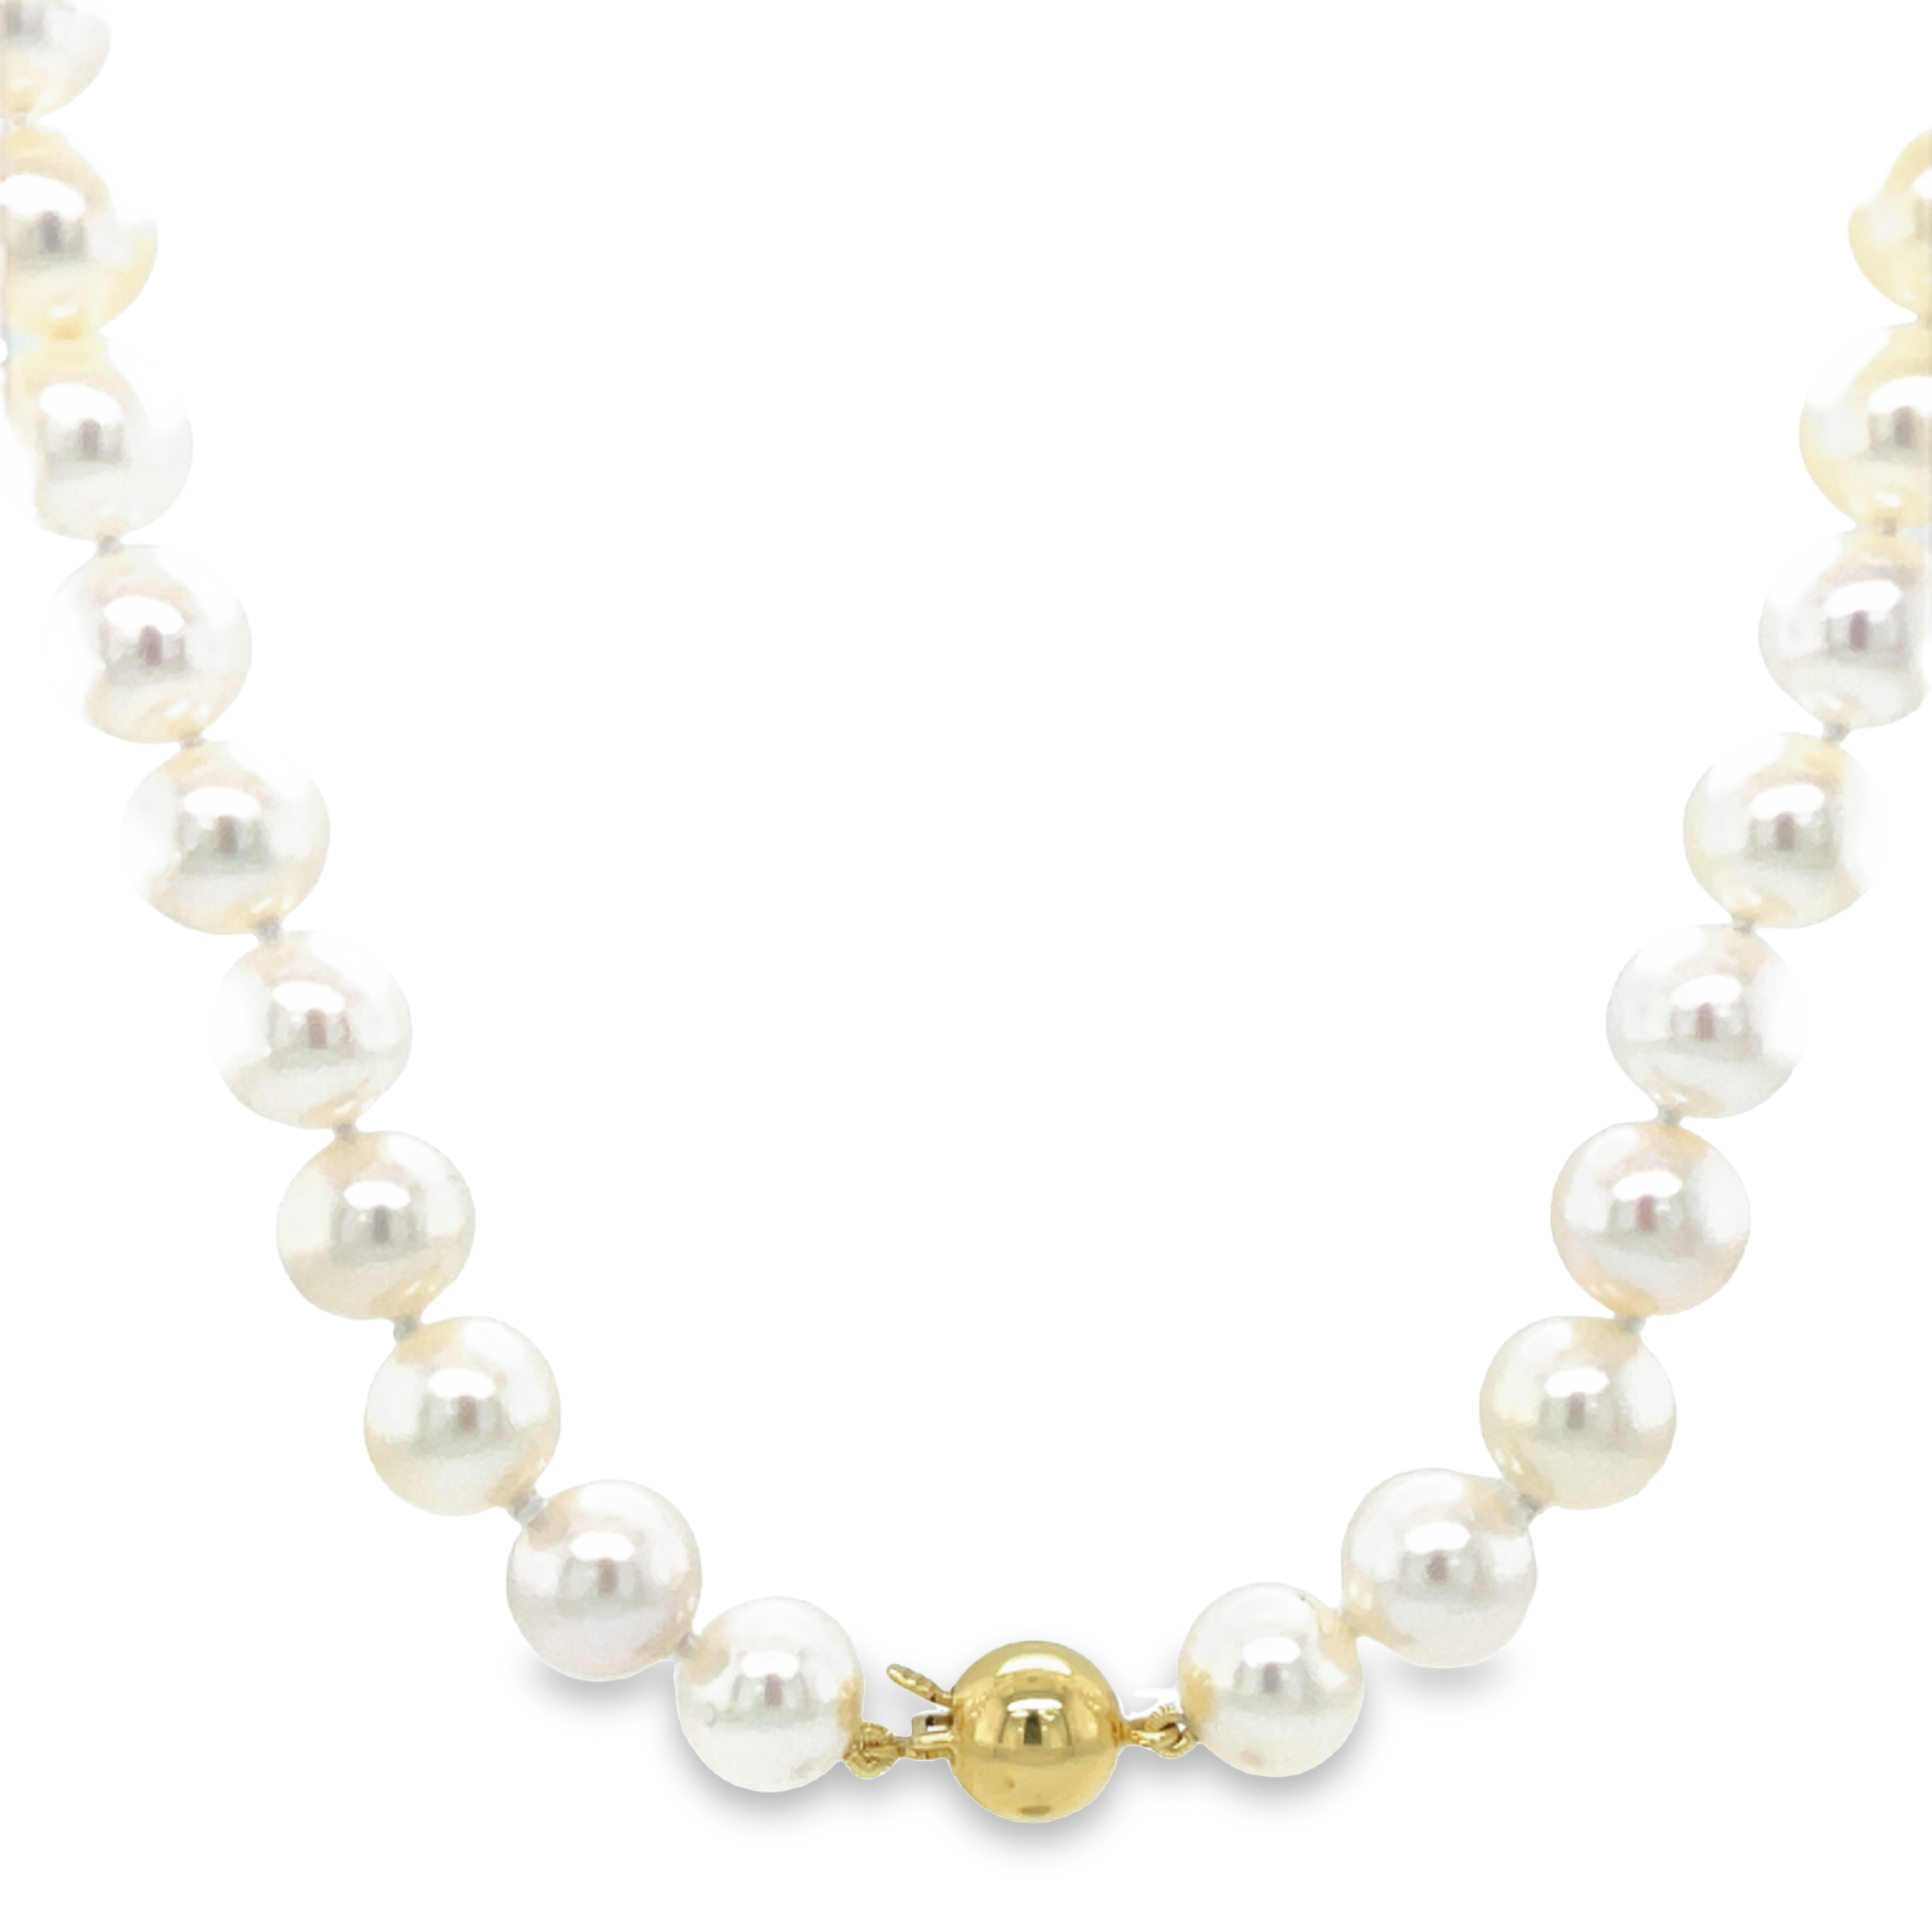 Fresh water pearls  Round shape 9.00 mm   14k gold plated clasp  19" long 